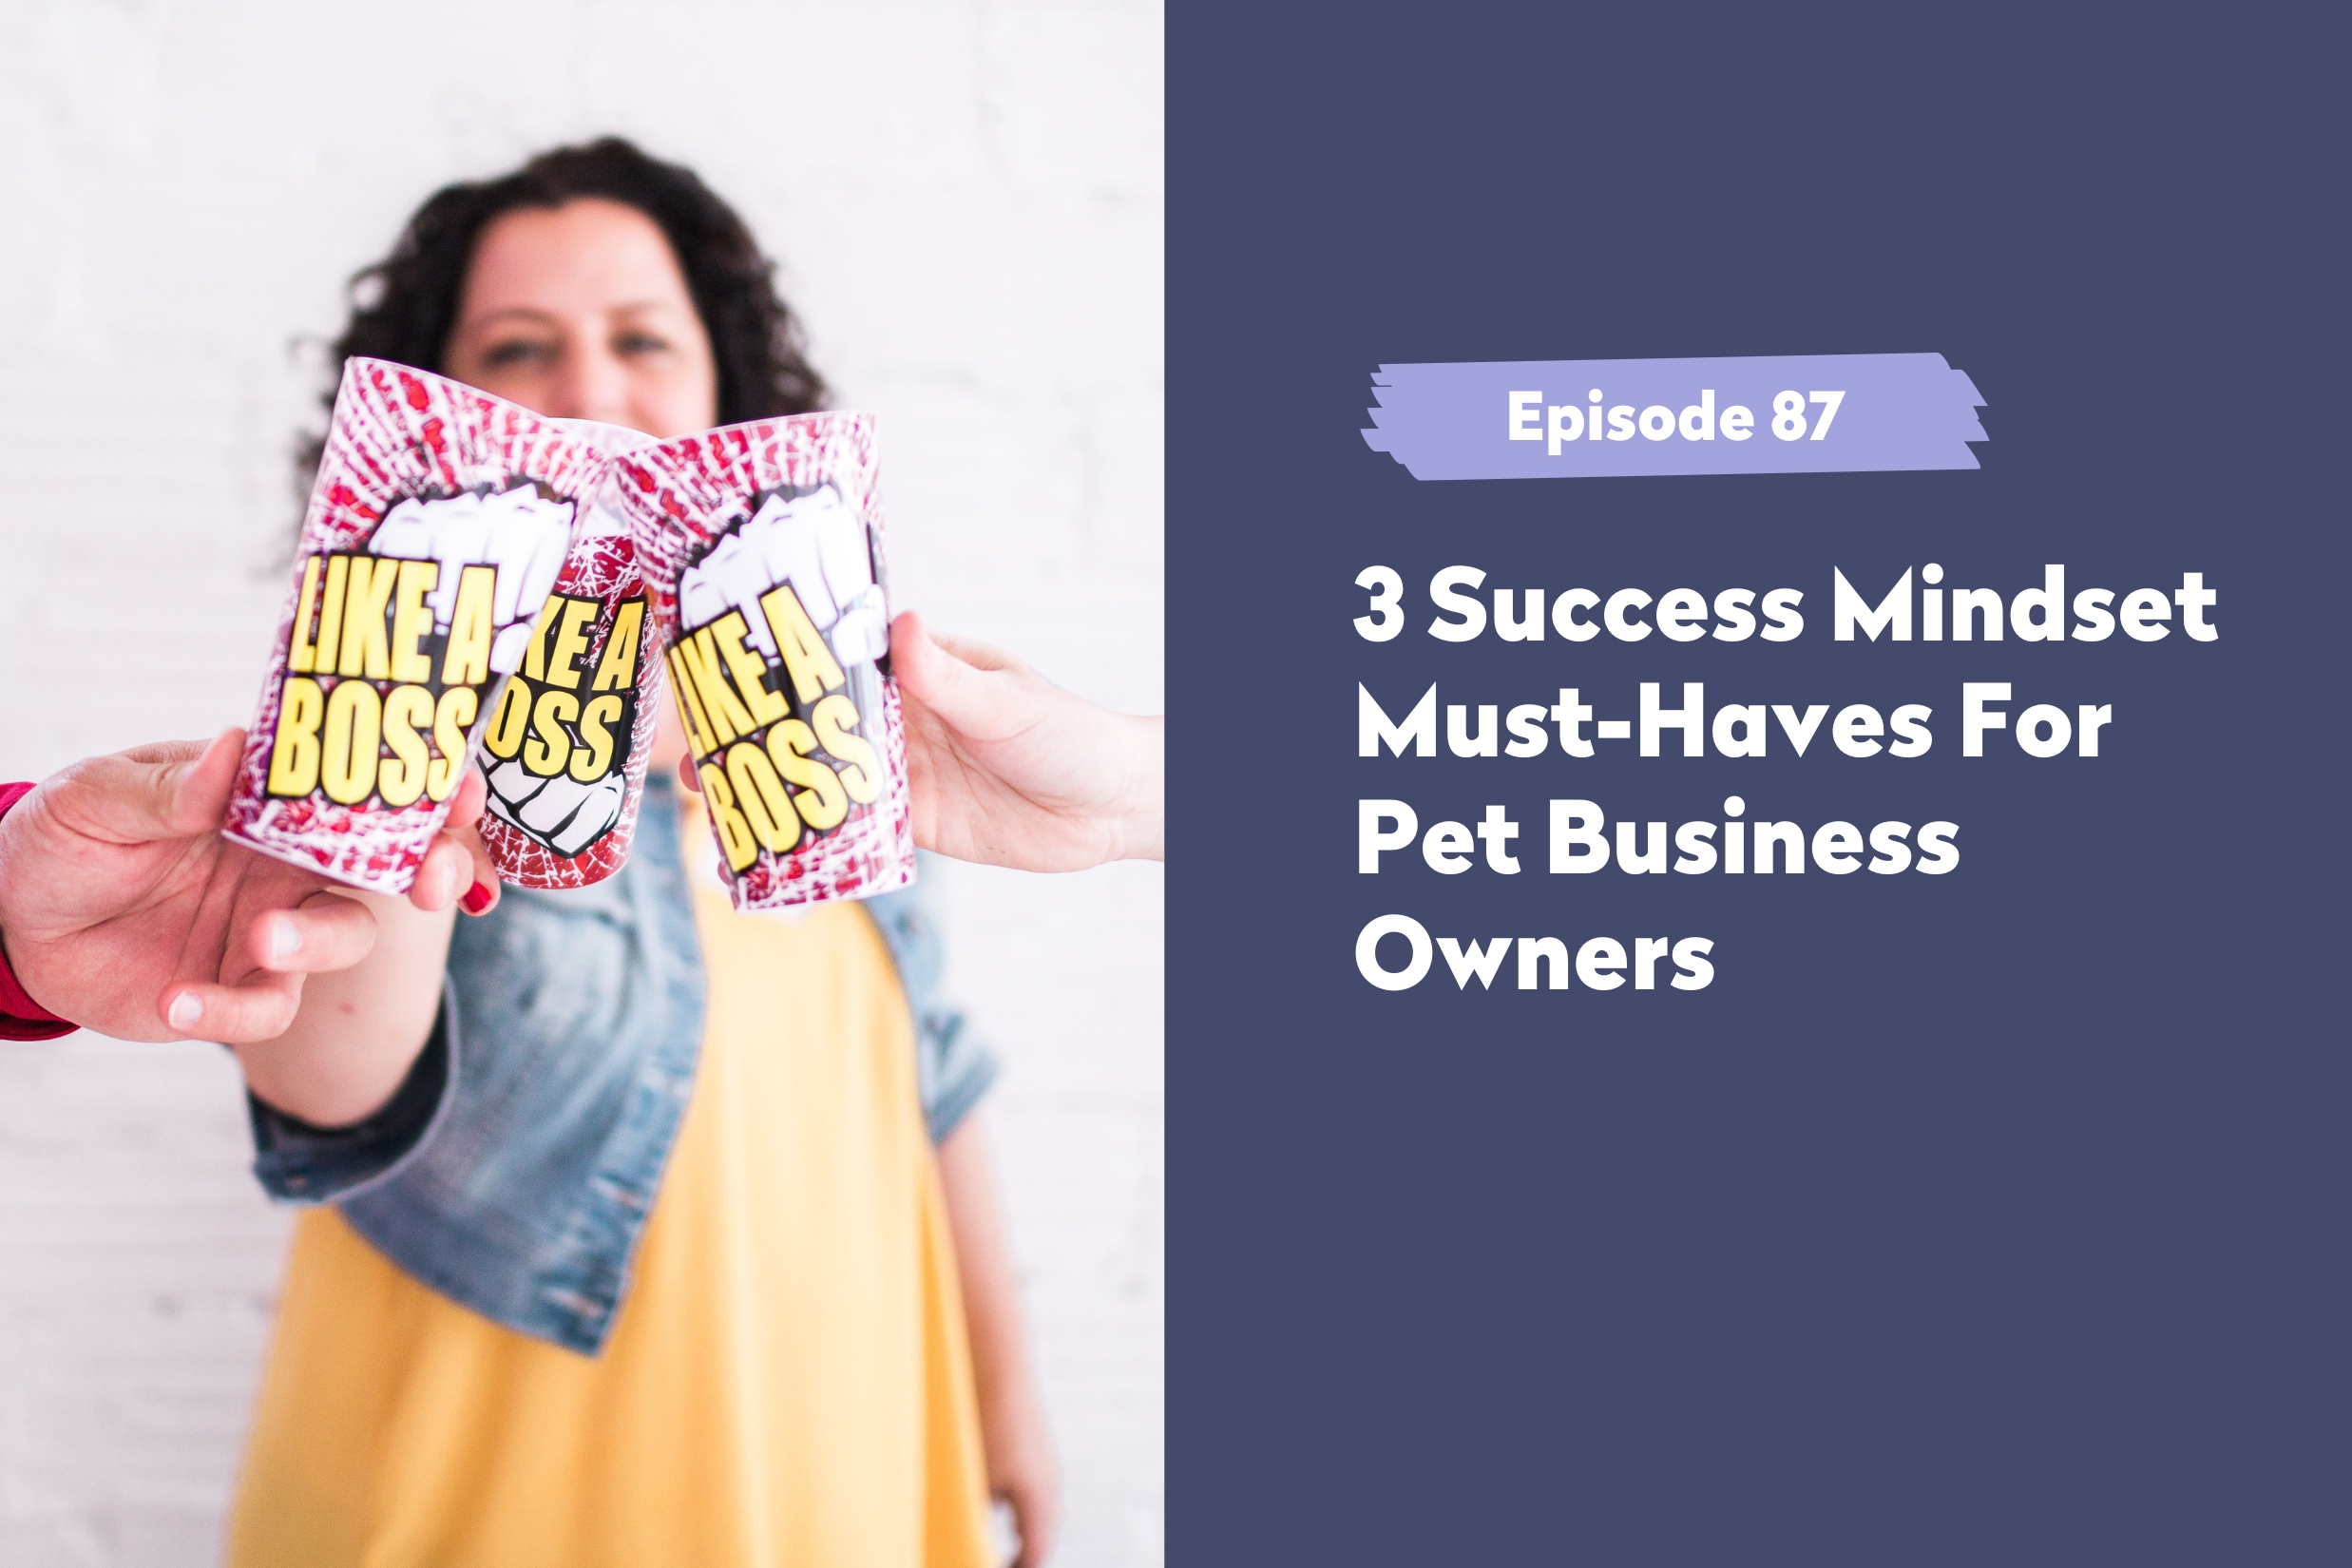 Episode 87 | 3 Success Mindset Must-Haves For Pet Business Owners